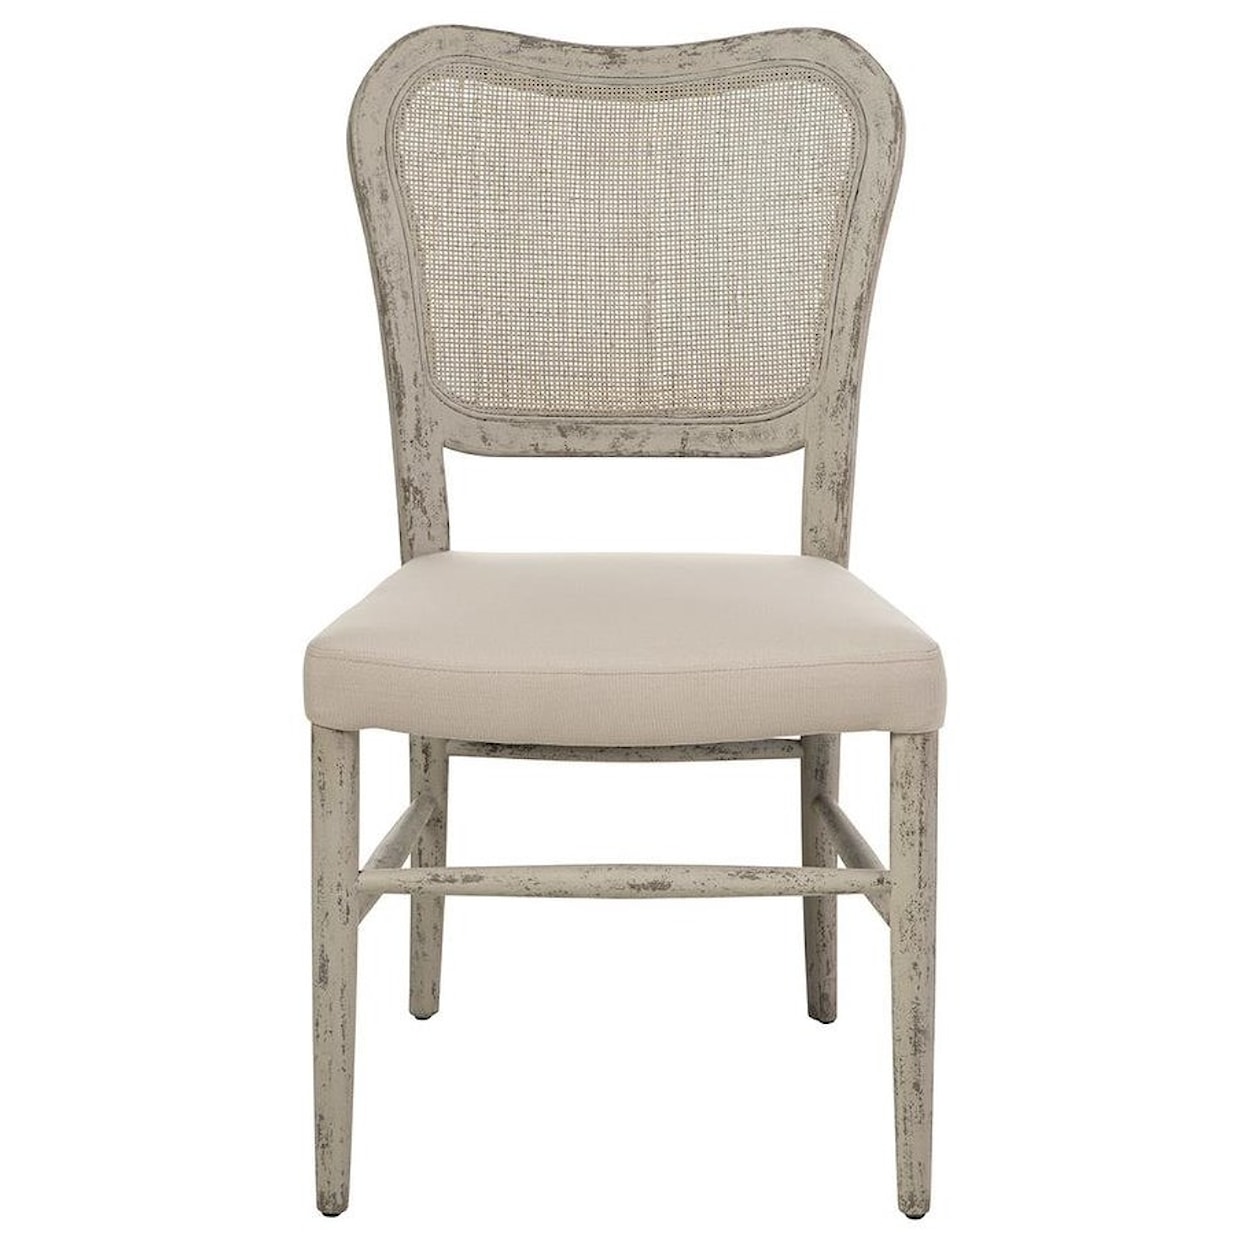 Furniture Classics Occasional Chairs Dove Craegan Dining Chair